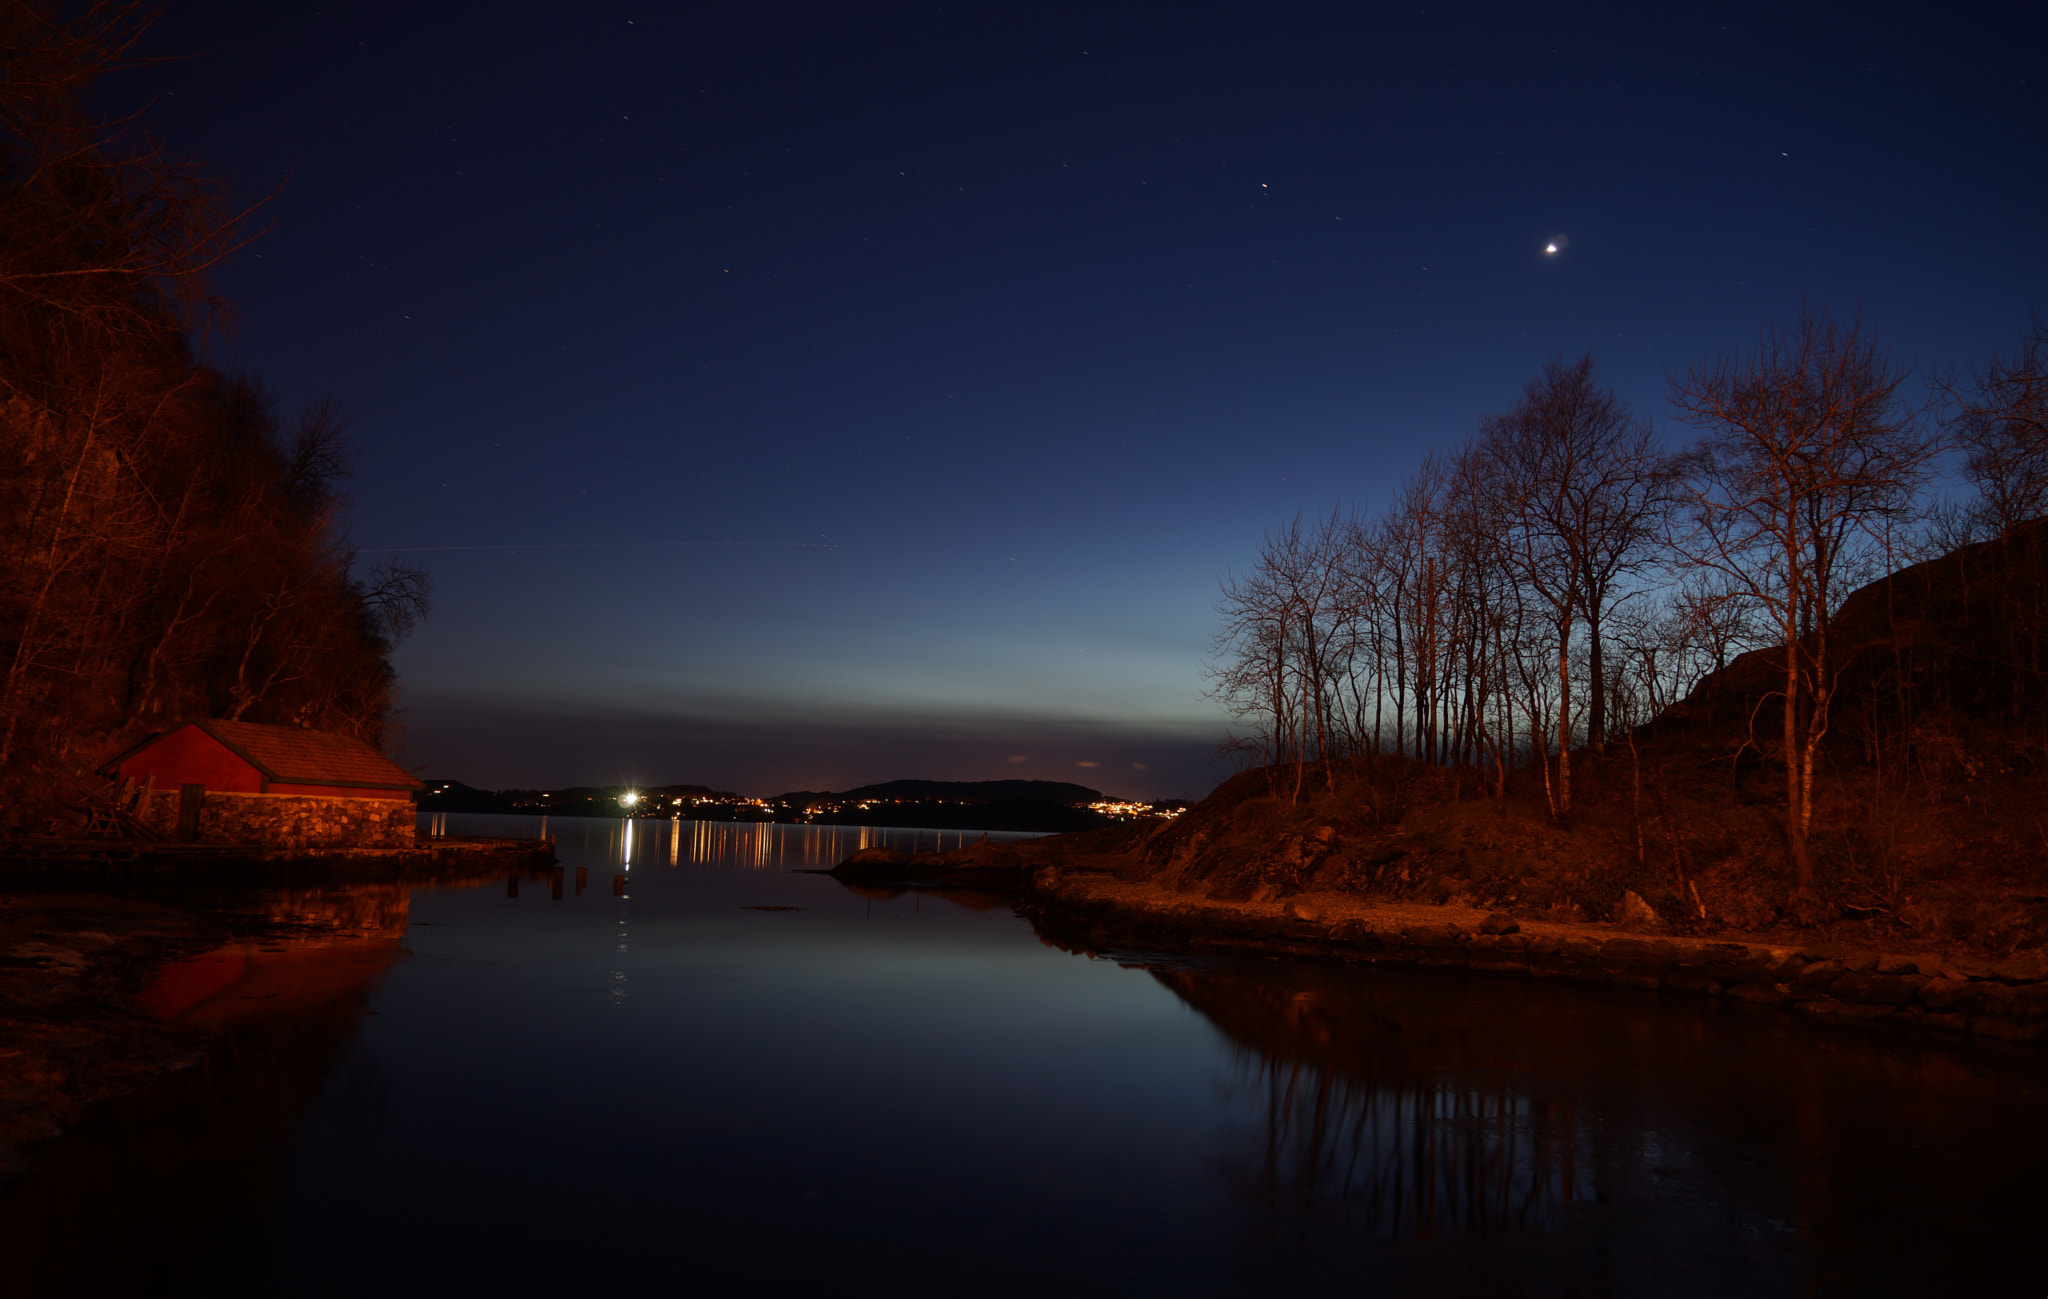 Sony a7 sample photo. Night photo from salhus in bergen, norway photography